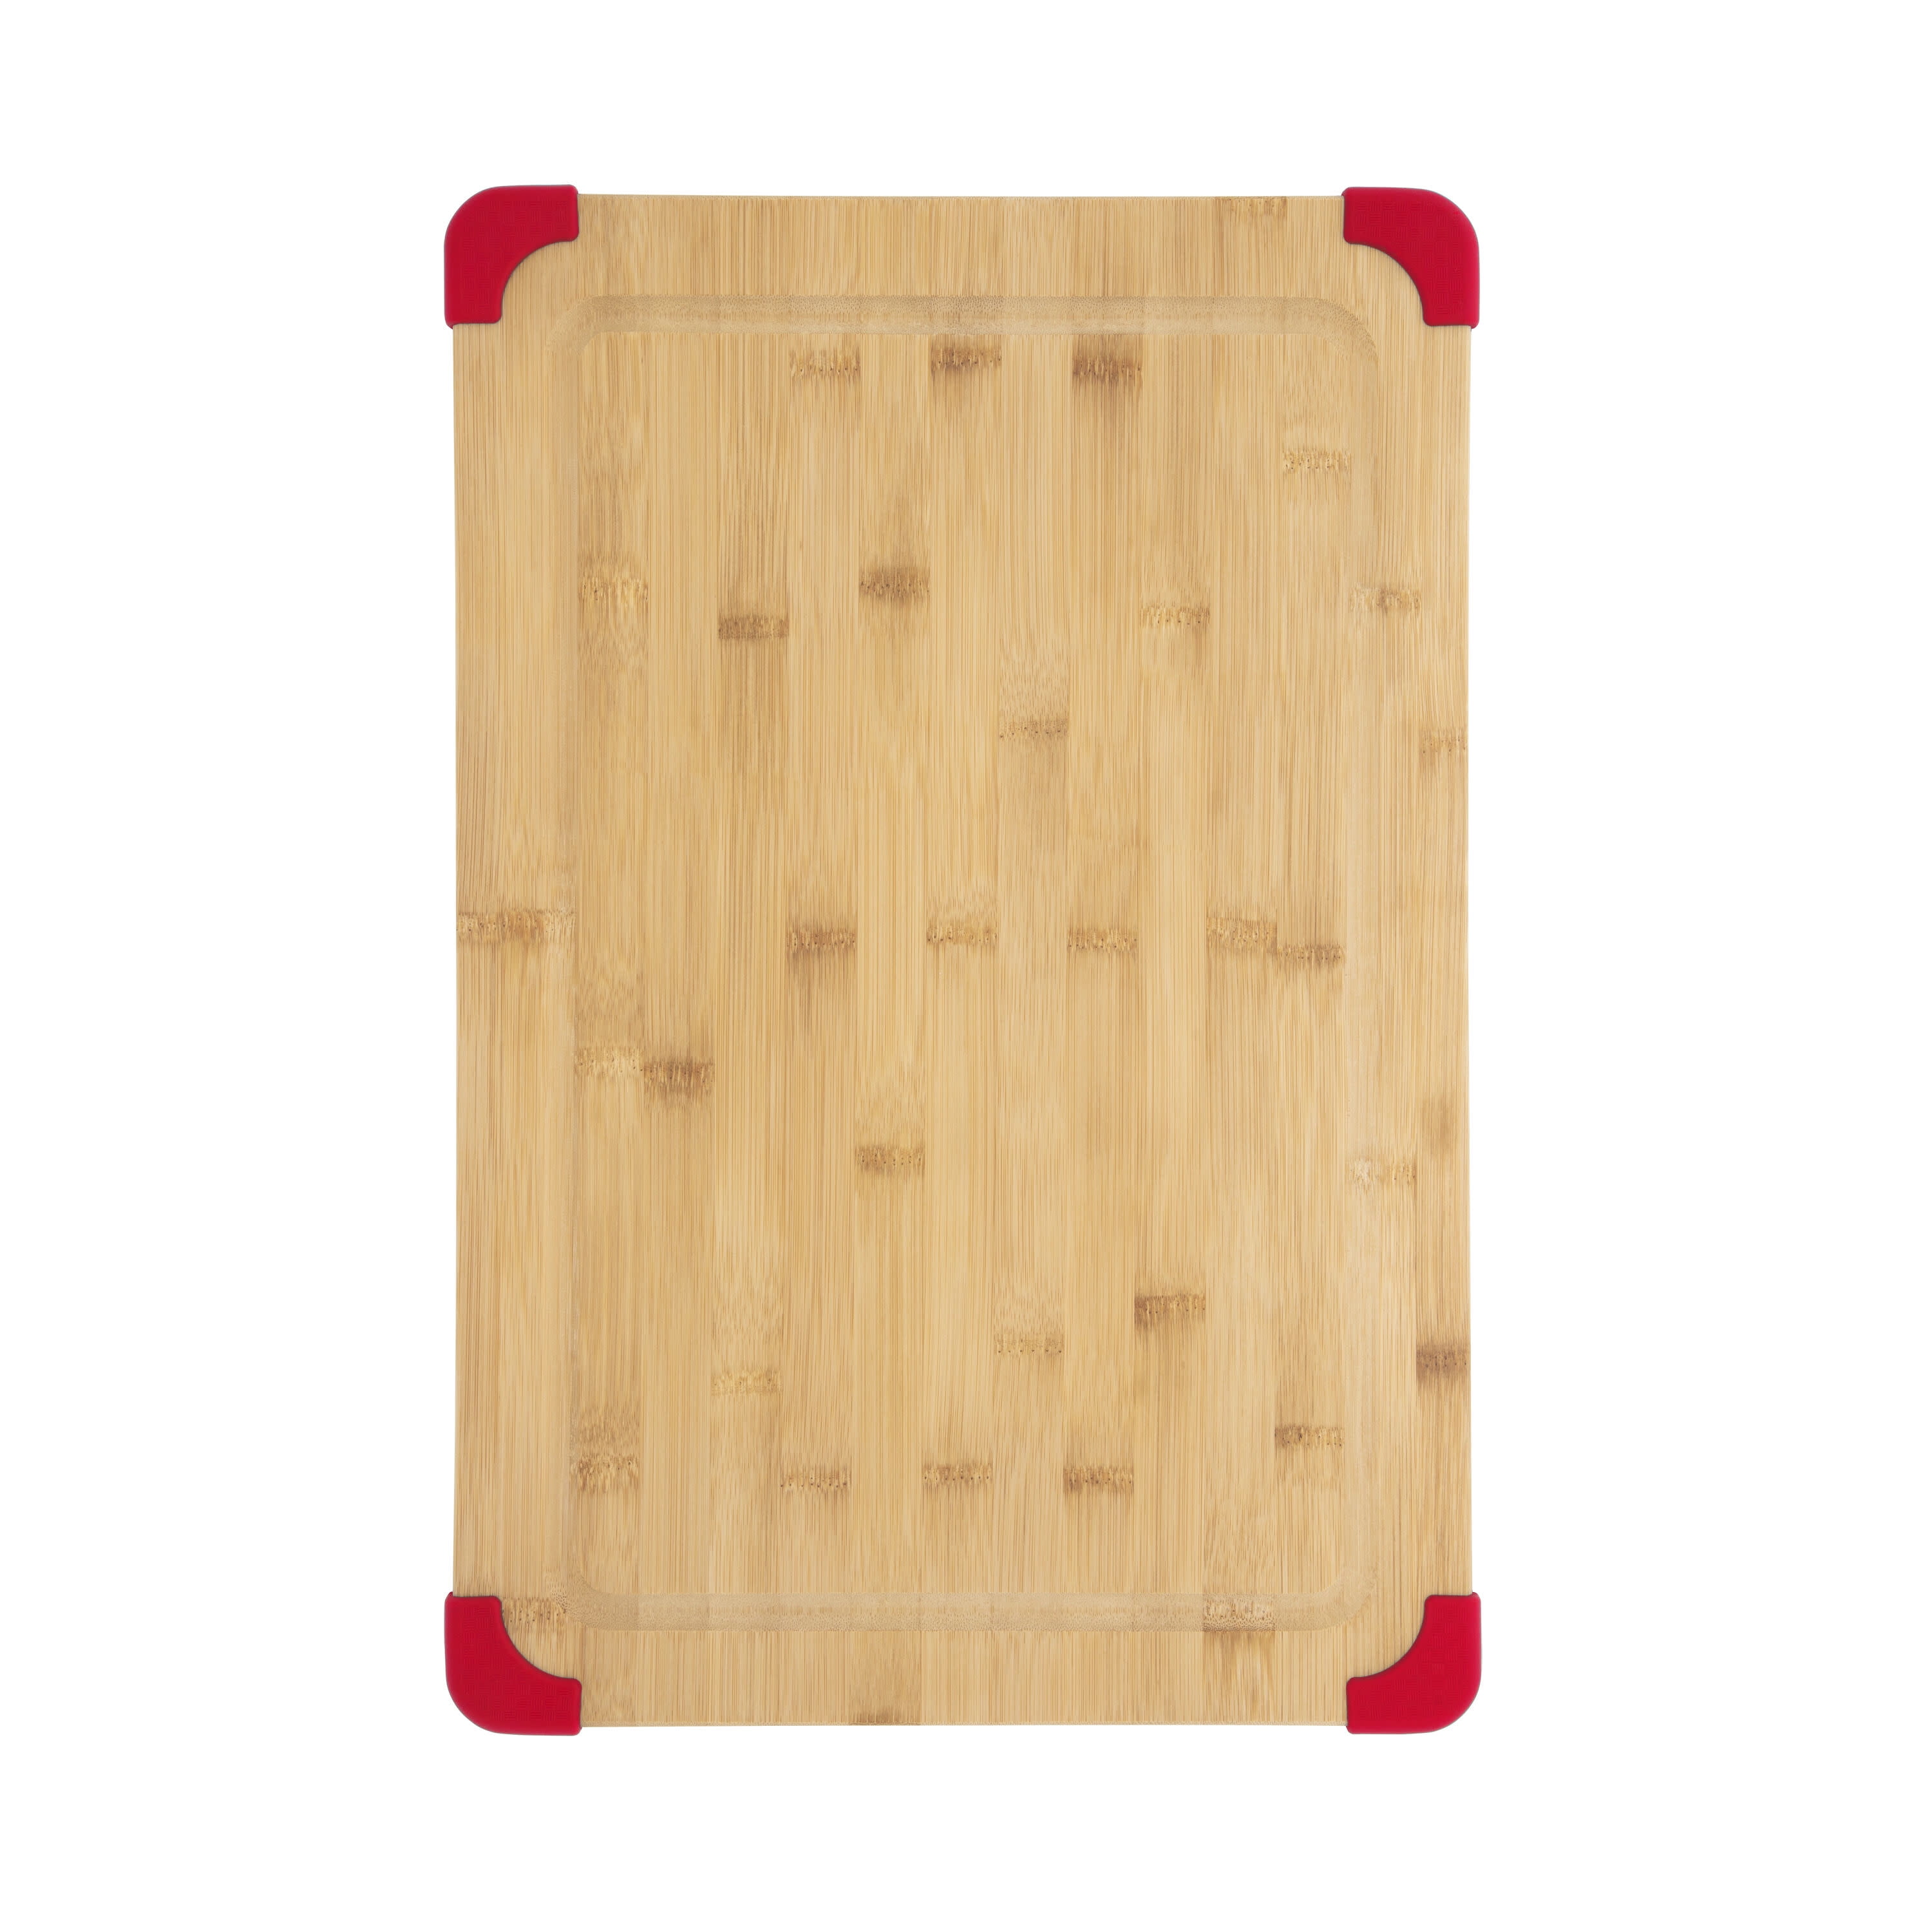 KitchenAid Empire Red Nonslip Bamboo Cutting Board 10.75 long by 8 wide.